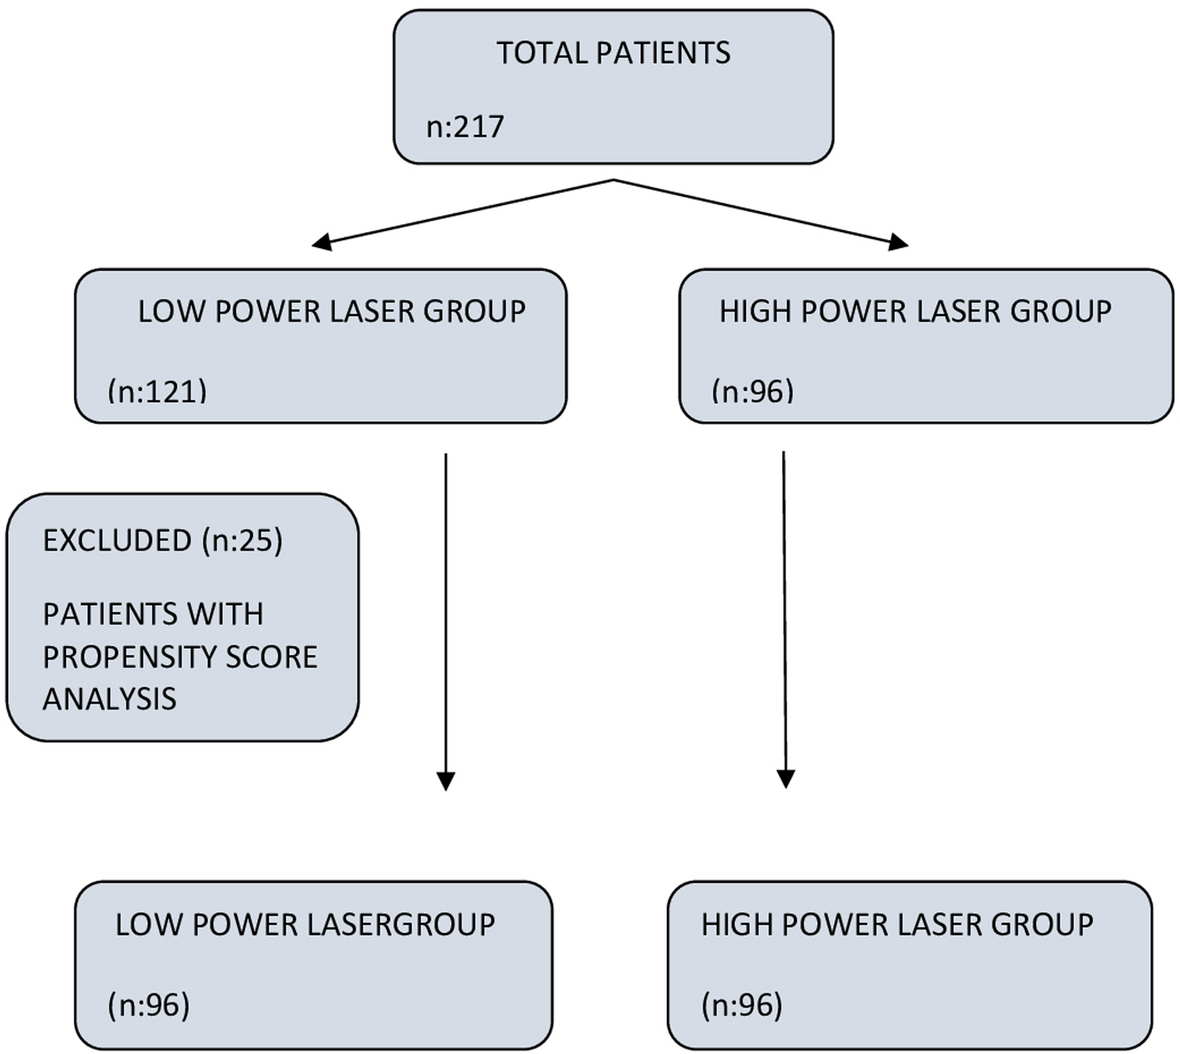 Multicentric evaluation of high and low power lasers on RIRS success using propensity score analysis